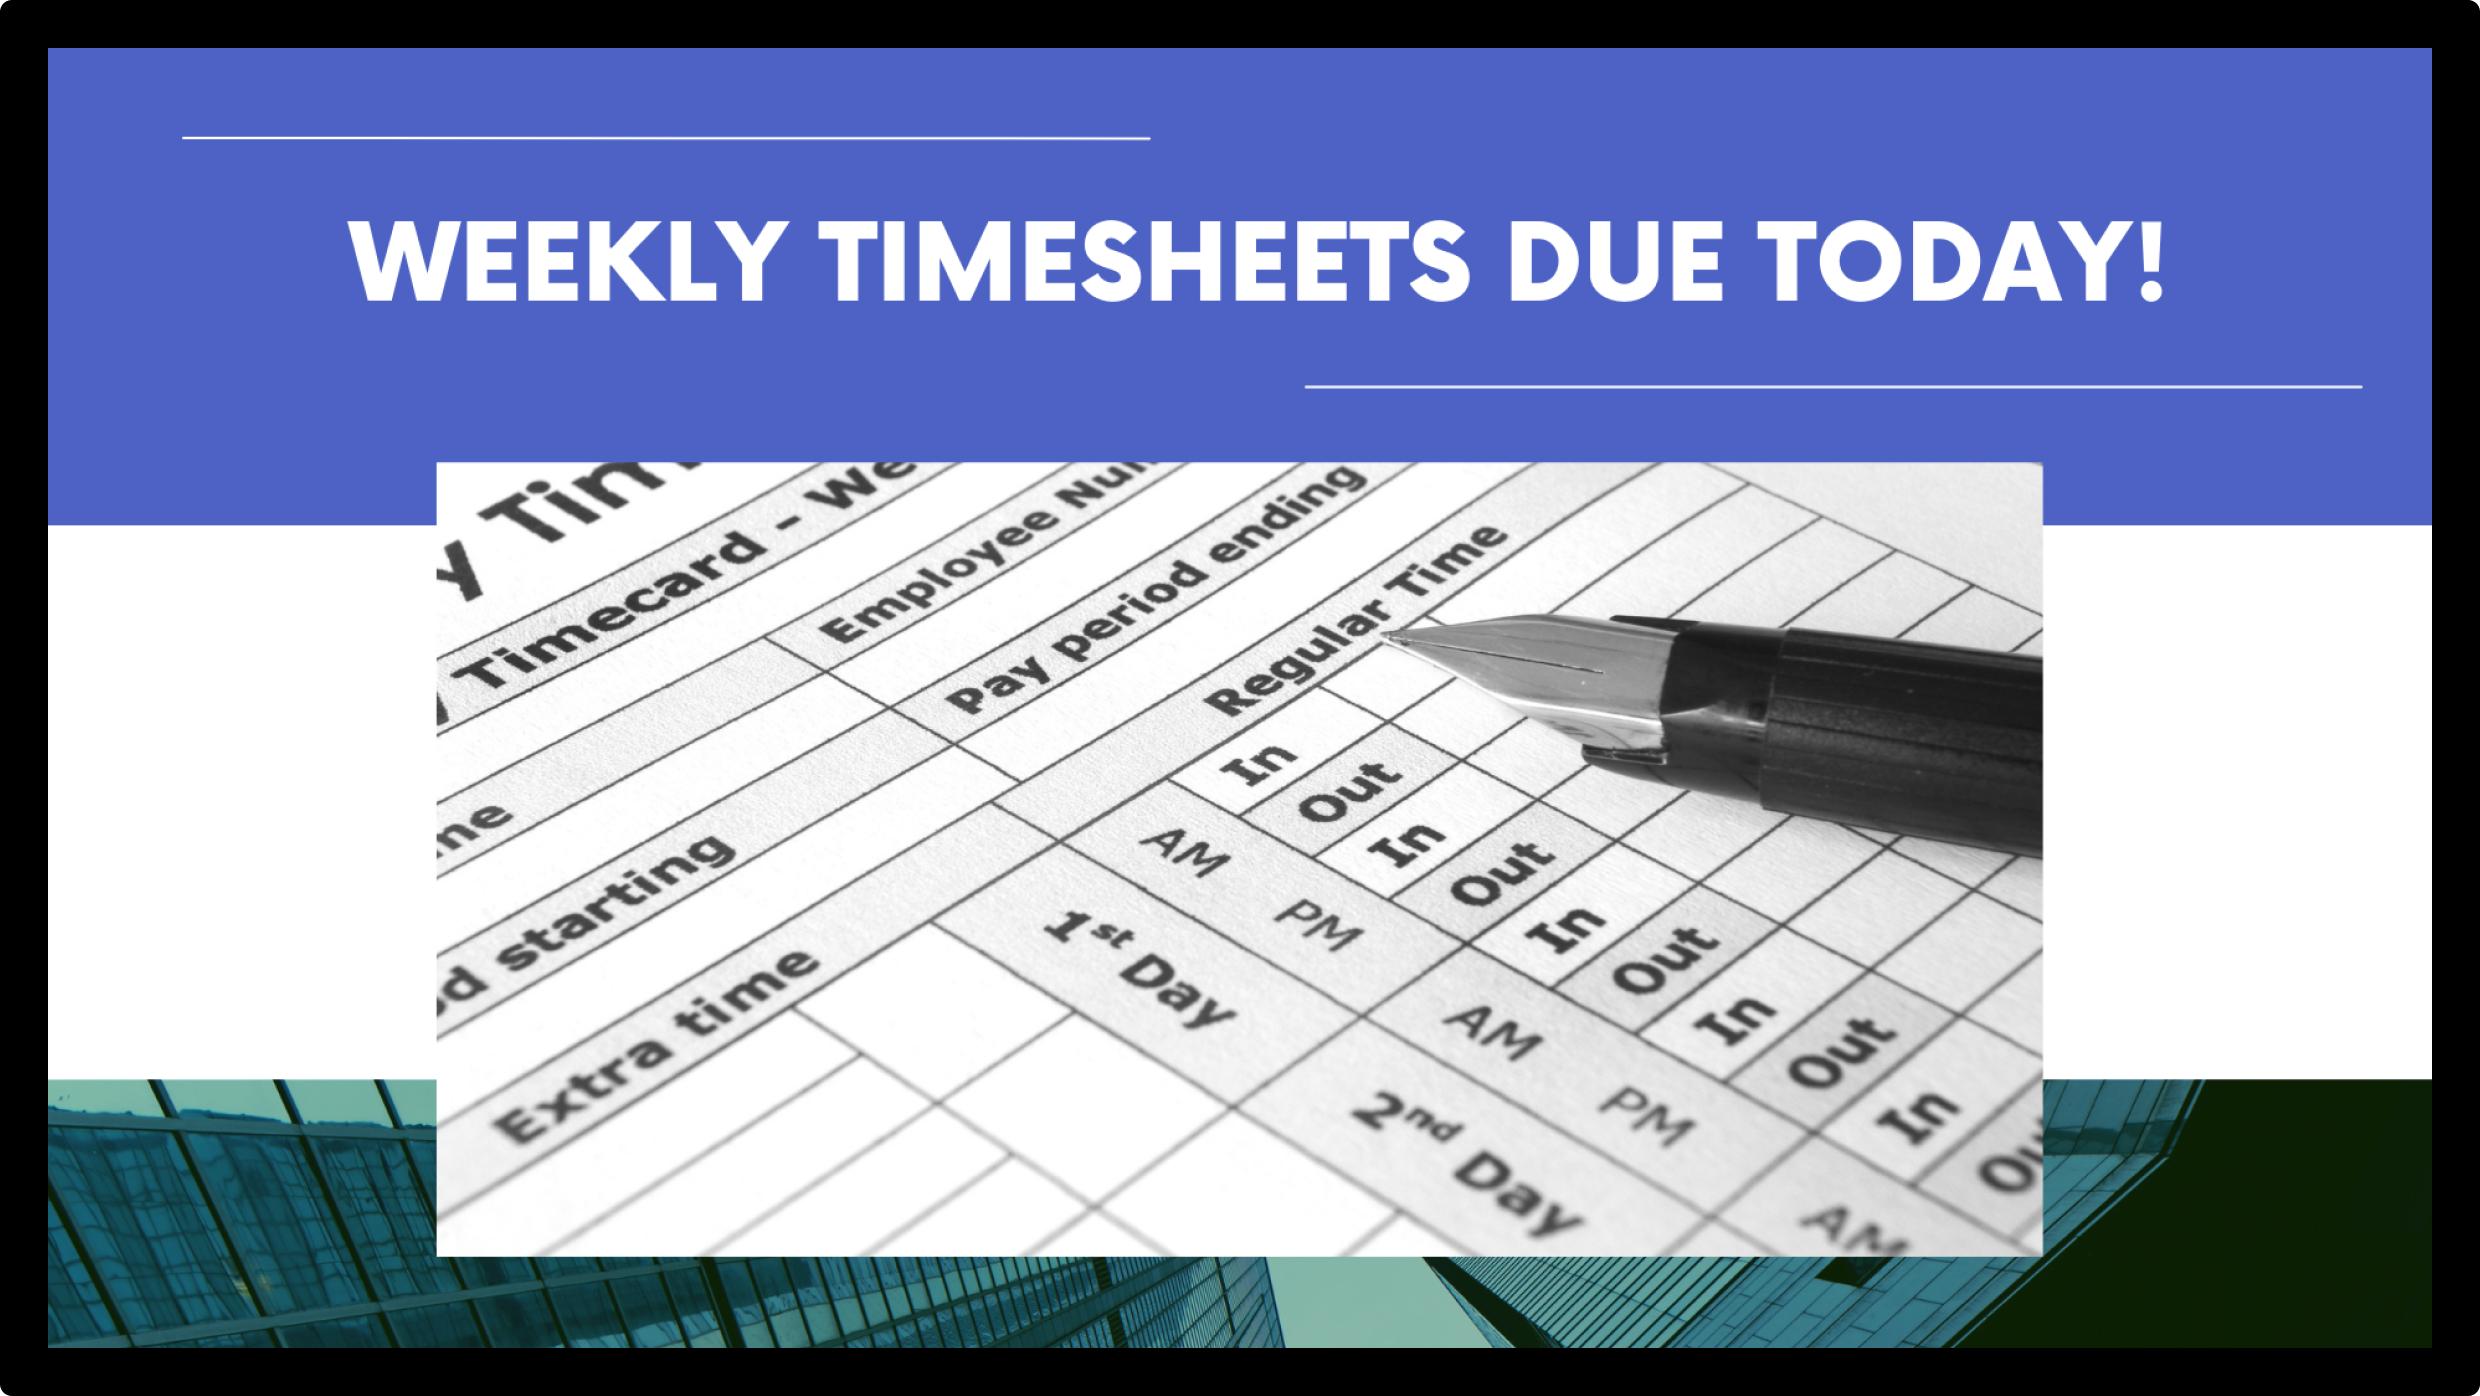 Screen example: Weekly timesheets due today!